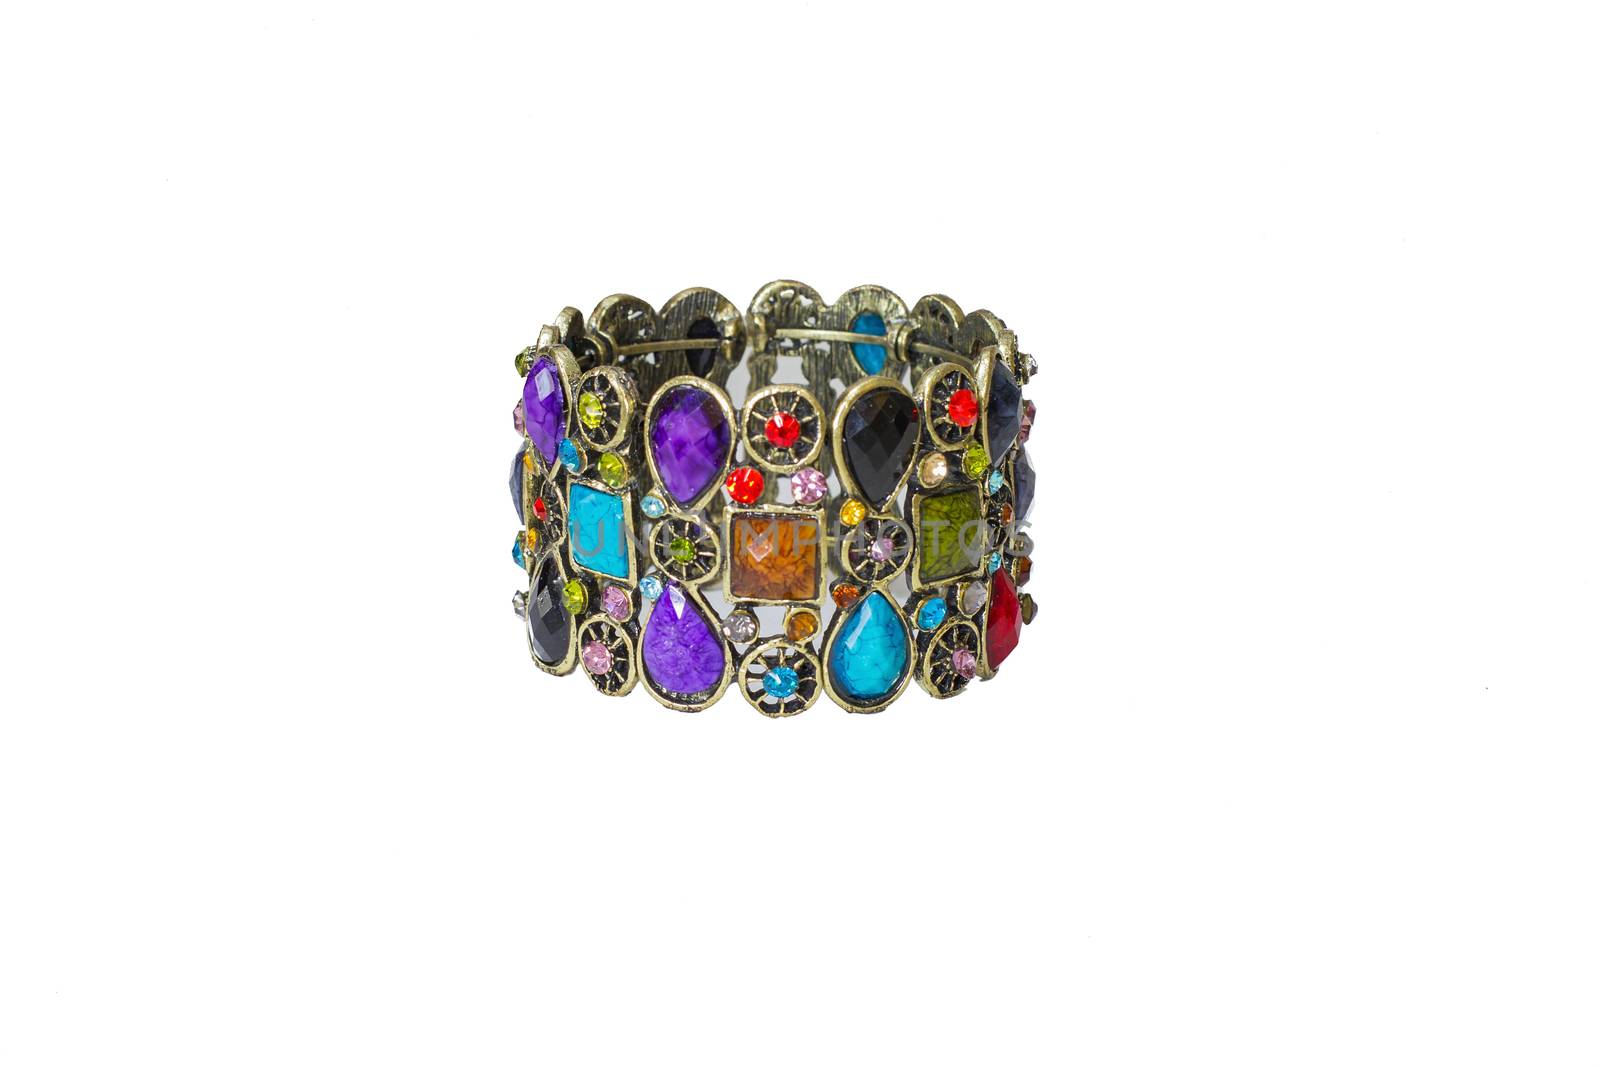 metal bracelet encrusted with colored stones, fashion jewelry in oriental style